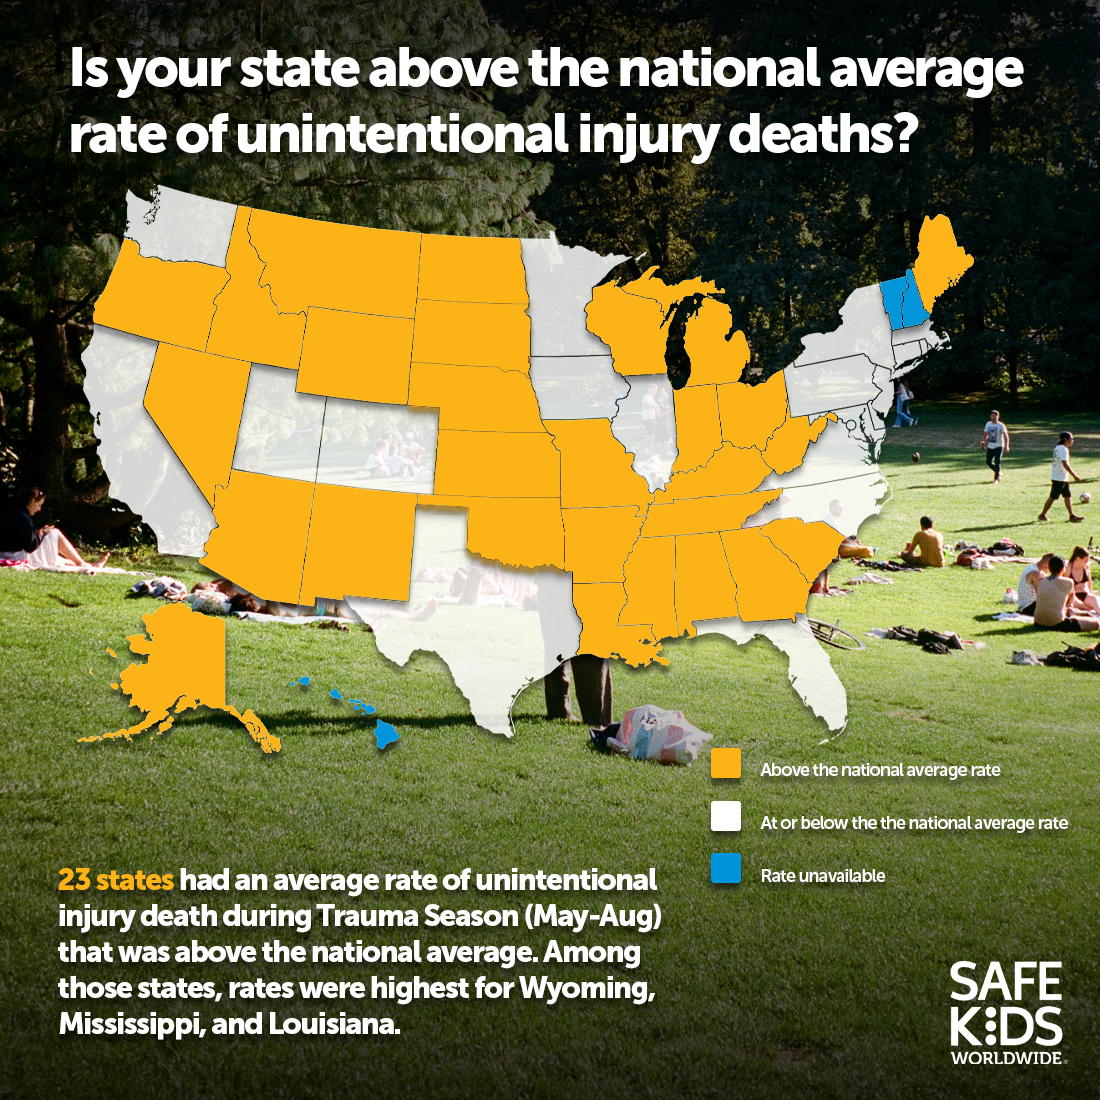 Did you know that where a child grows up can impact their risk for unintentional injuries? Between 2019 & 2021, 23 states had an average rate of unintentional injury death that was above the national average. Is your state above average?